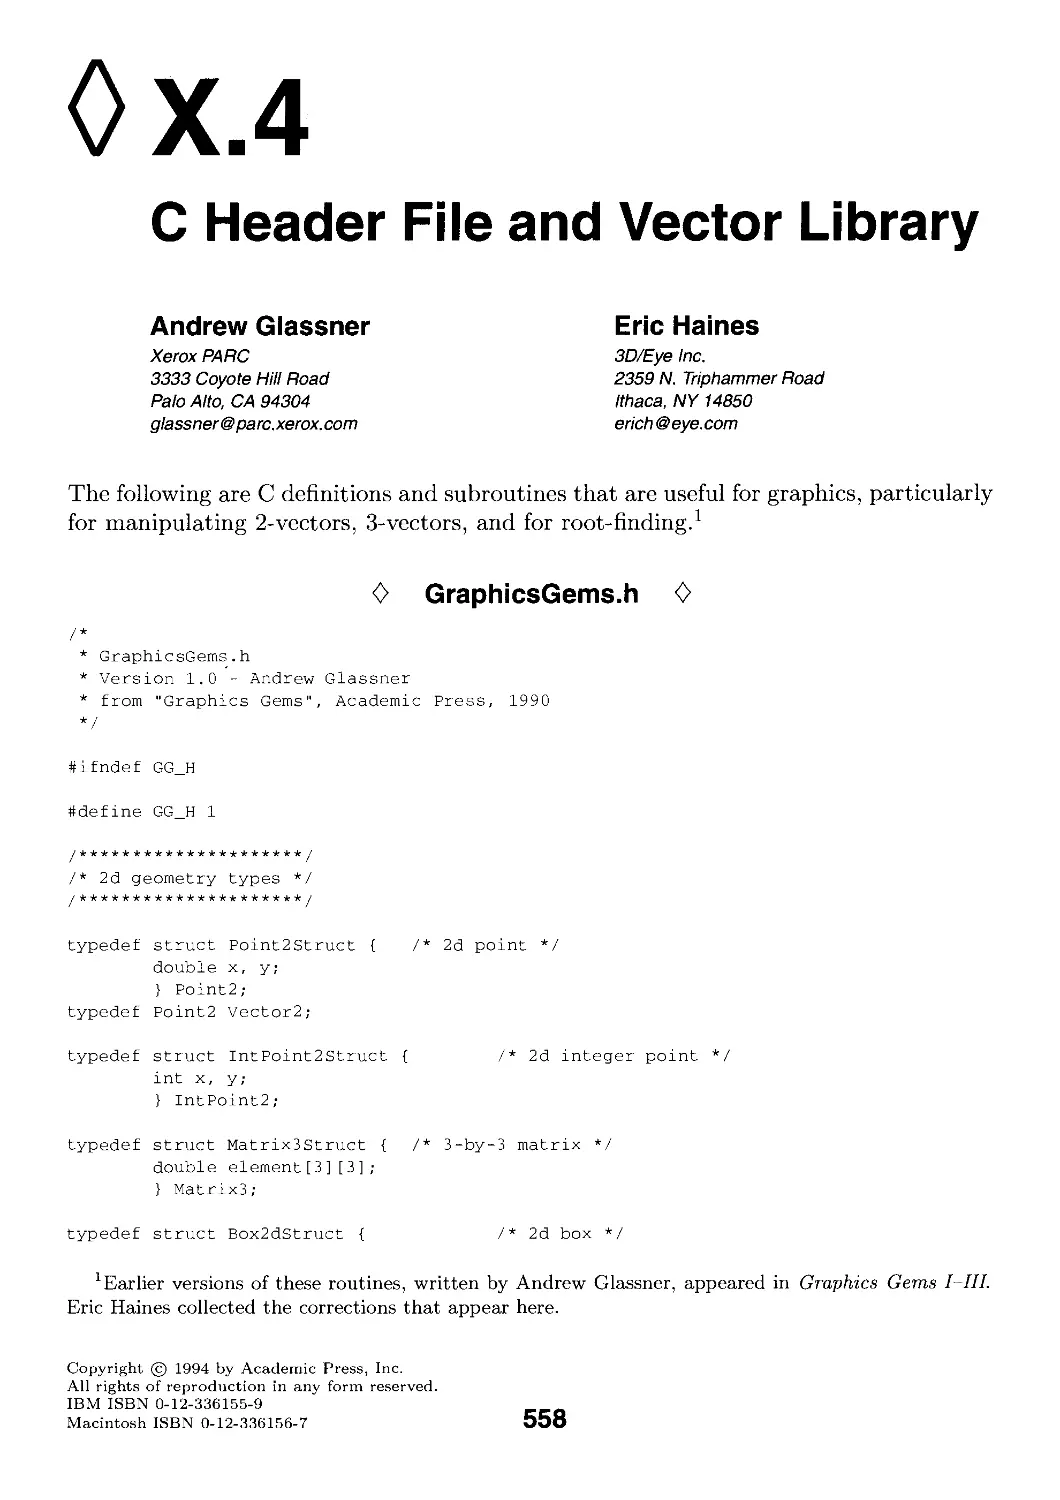 X.4. C Header File and Vector Library by Andrew Glassner and Eric Haines